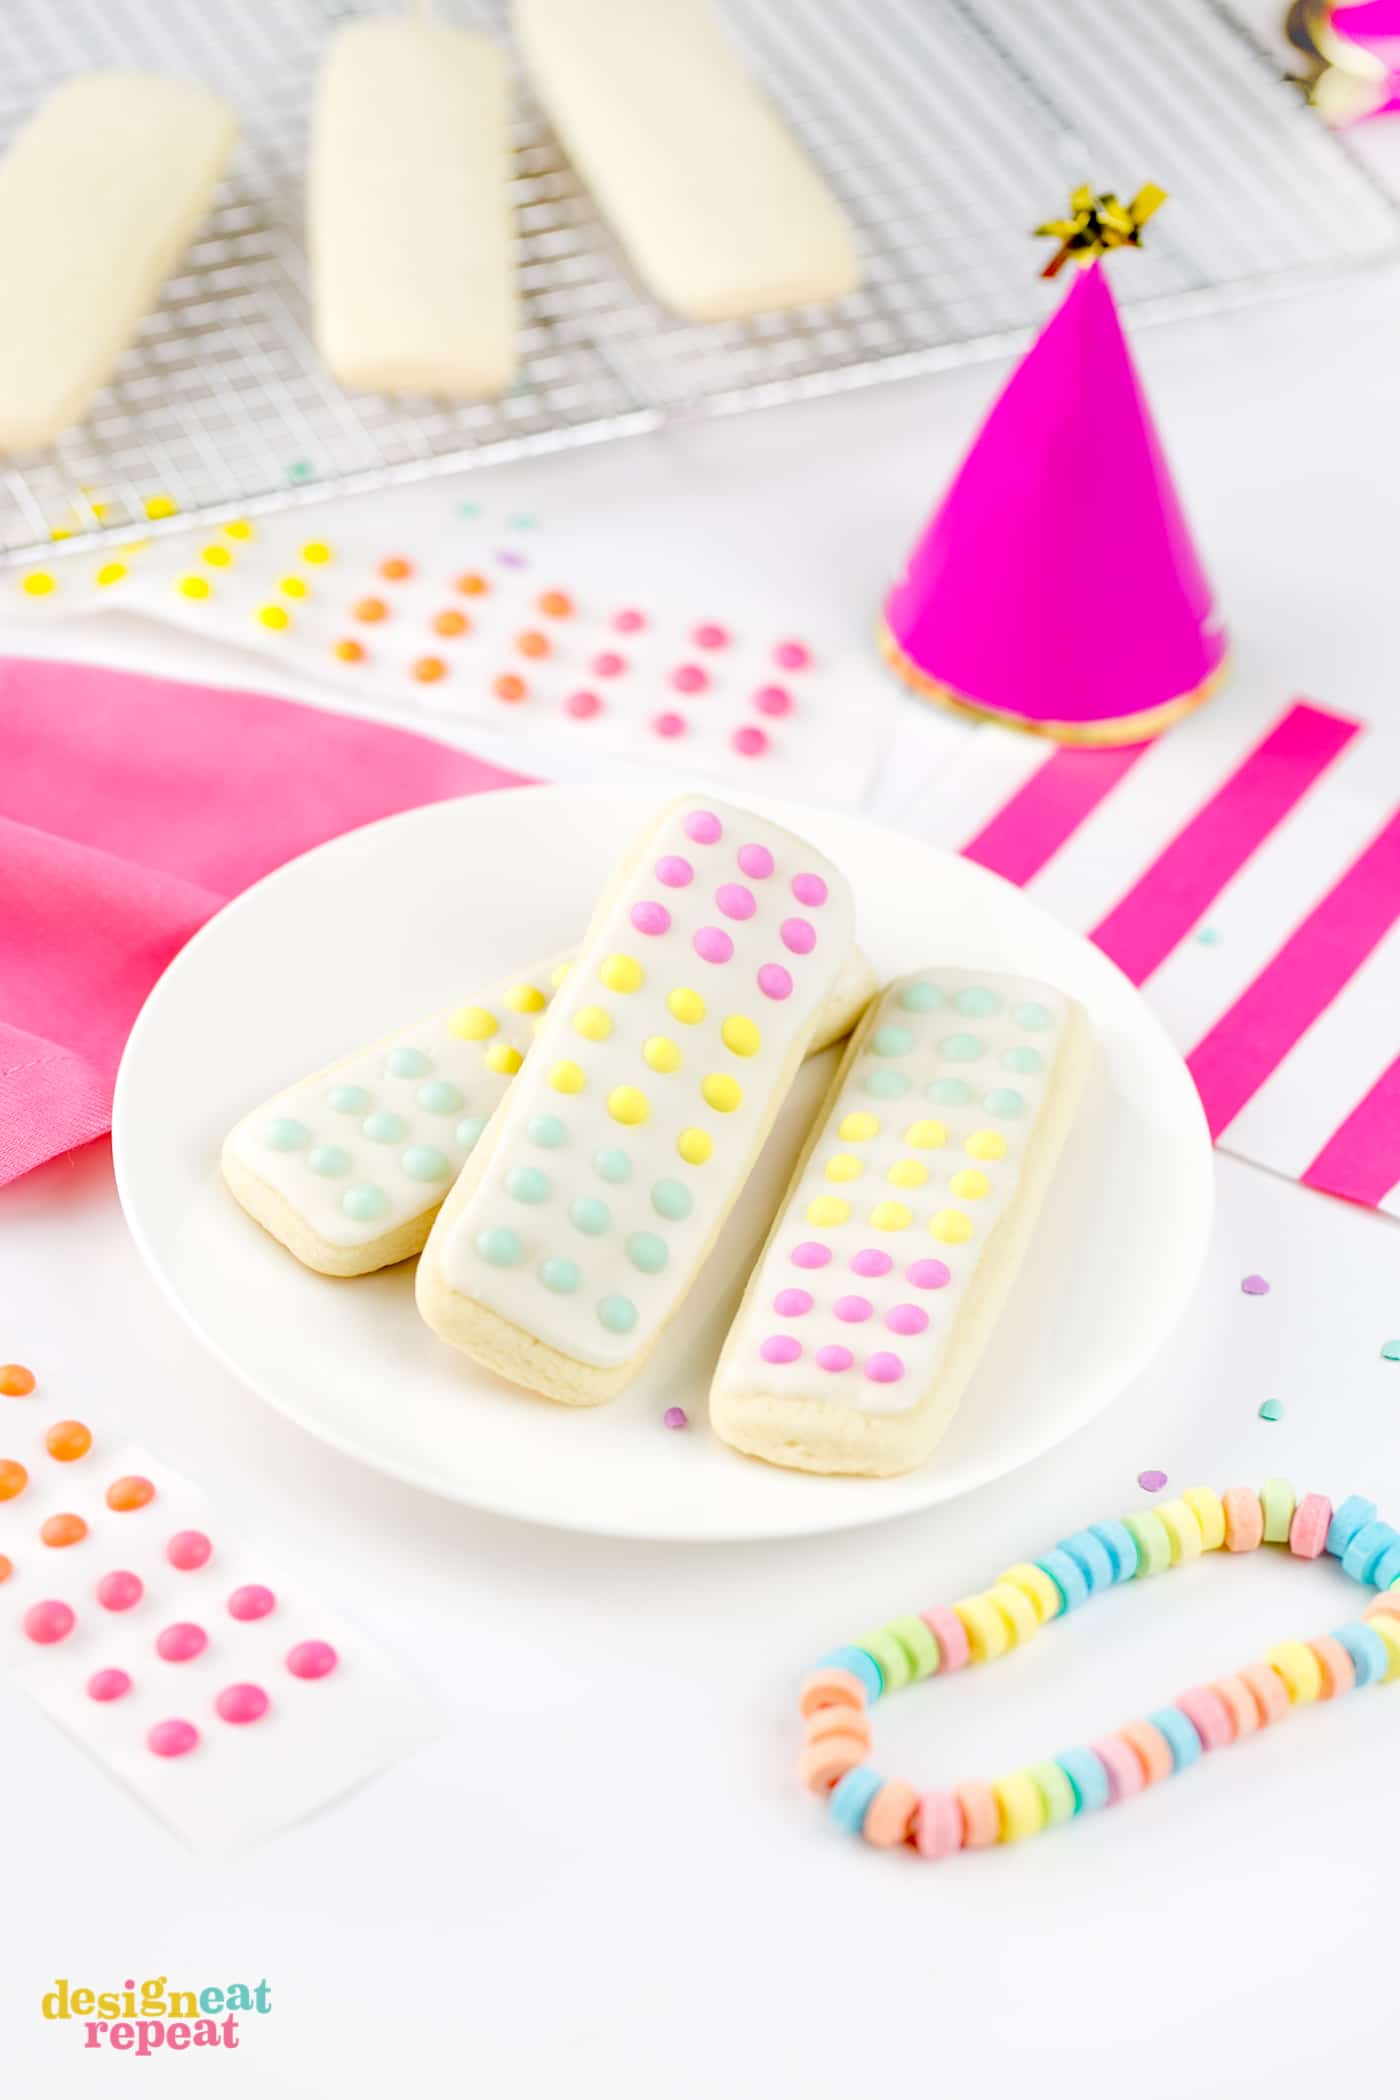 Anyone remember those vintage candy buttons?! Now you can make replicas that actually taste good by turning them into cookie form! Perfect for birthday party cookies, Halloween treats, or just an easy candy party idea!